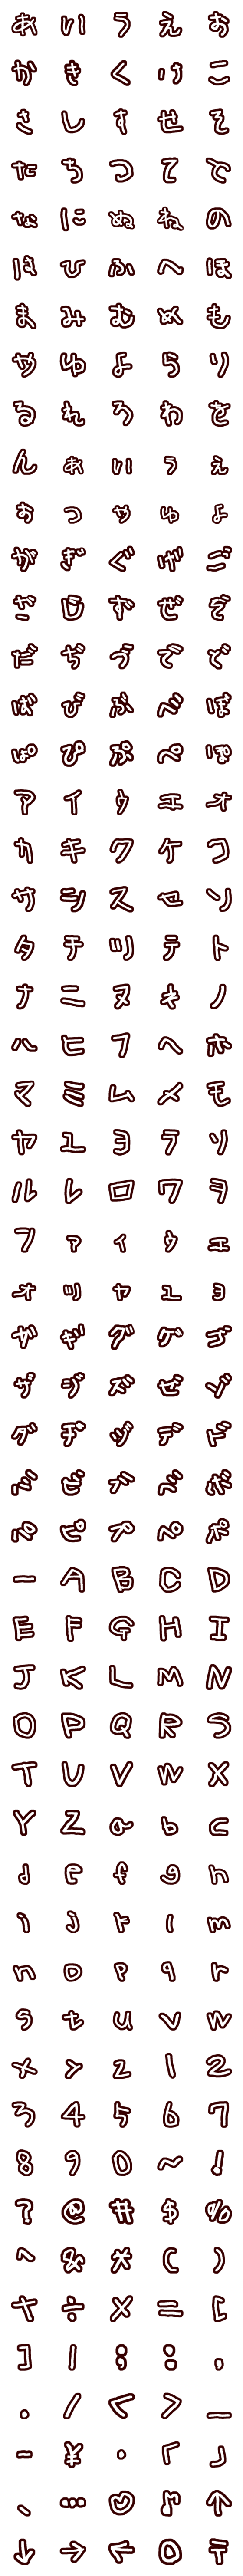 [LINE絵文字]⭐ムーの記念デコ文字セット⭐の画像一覧